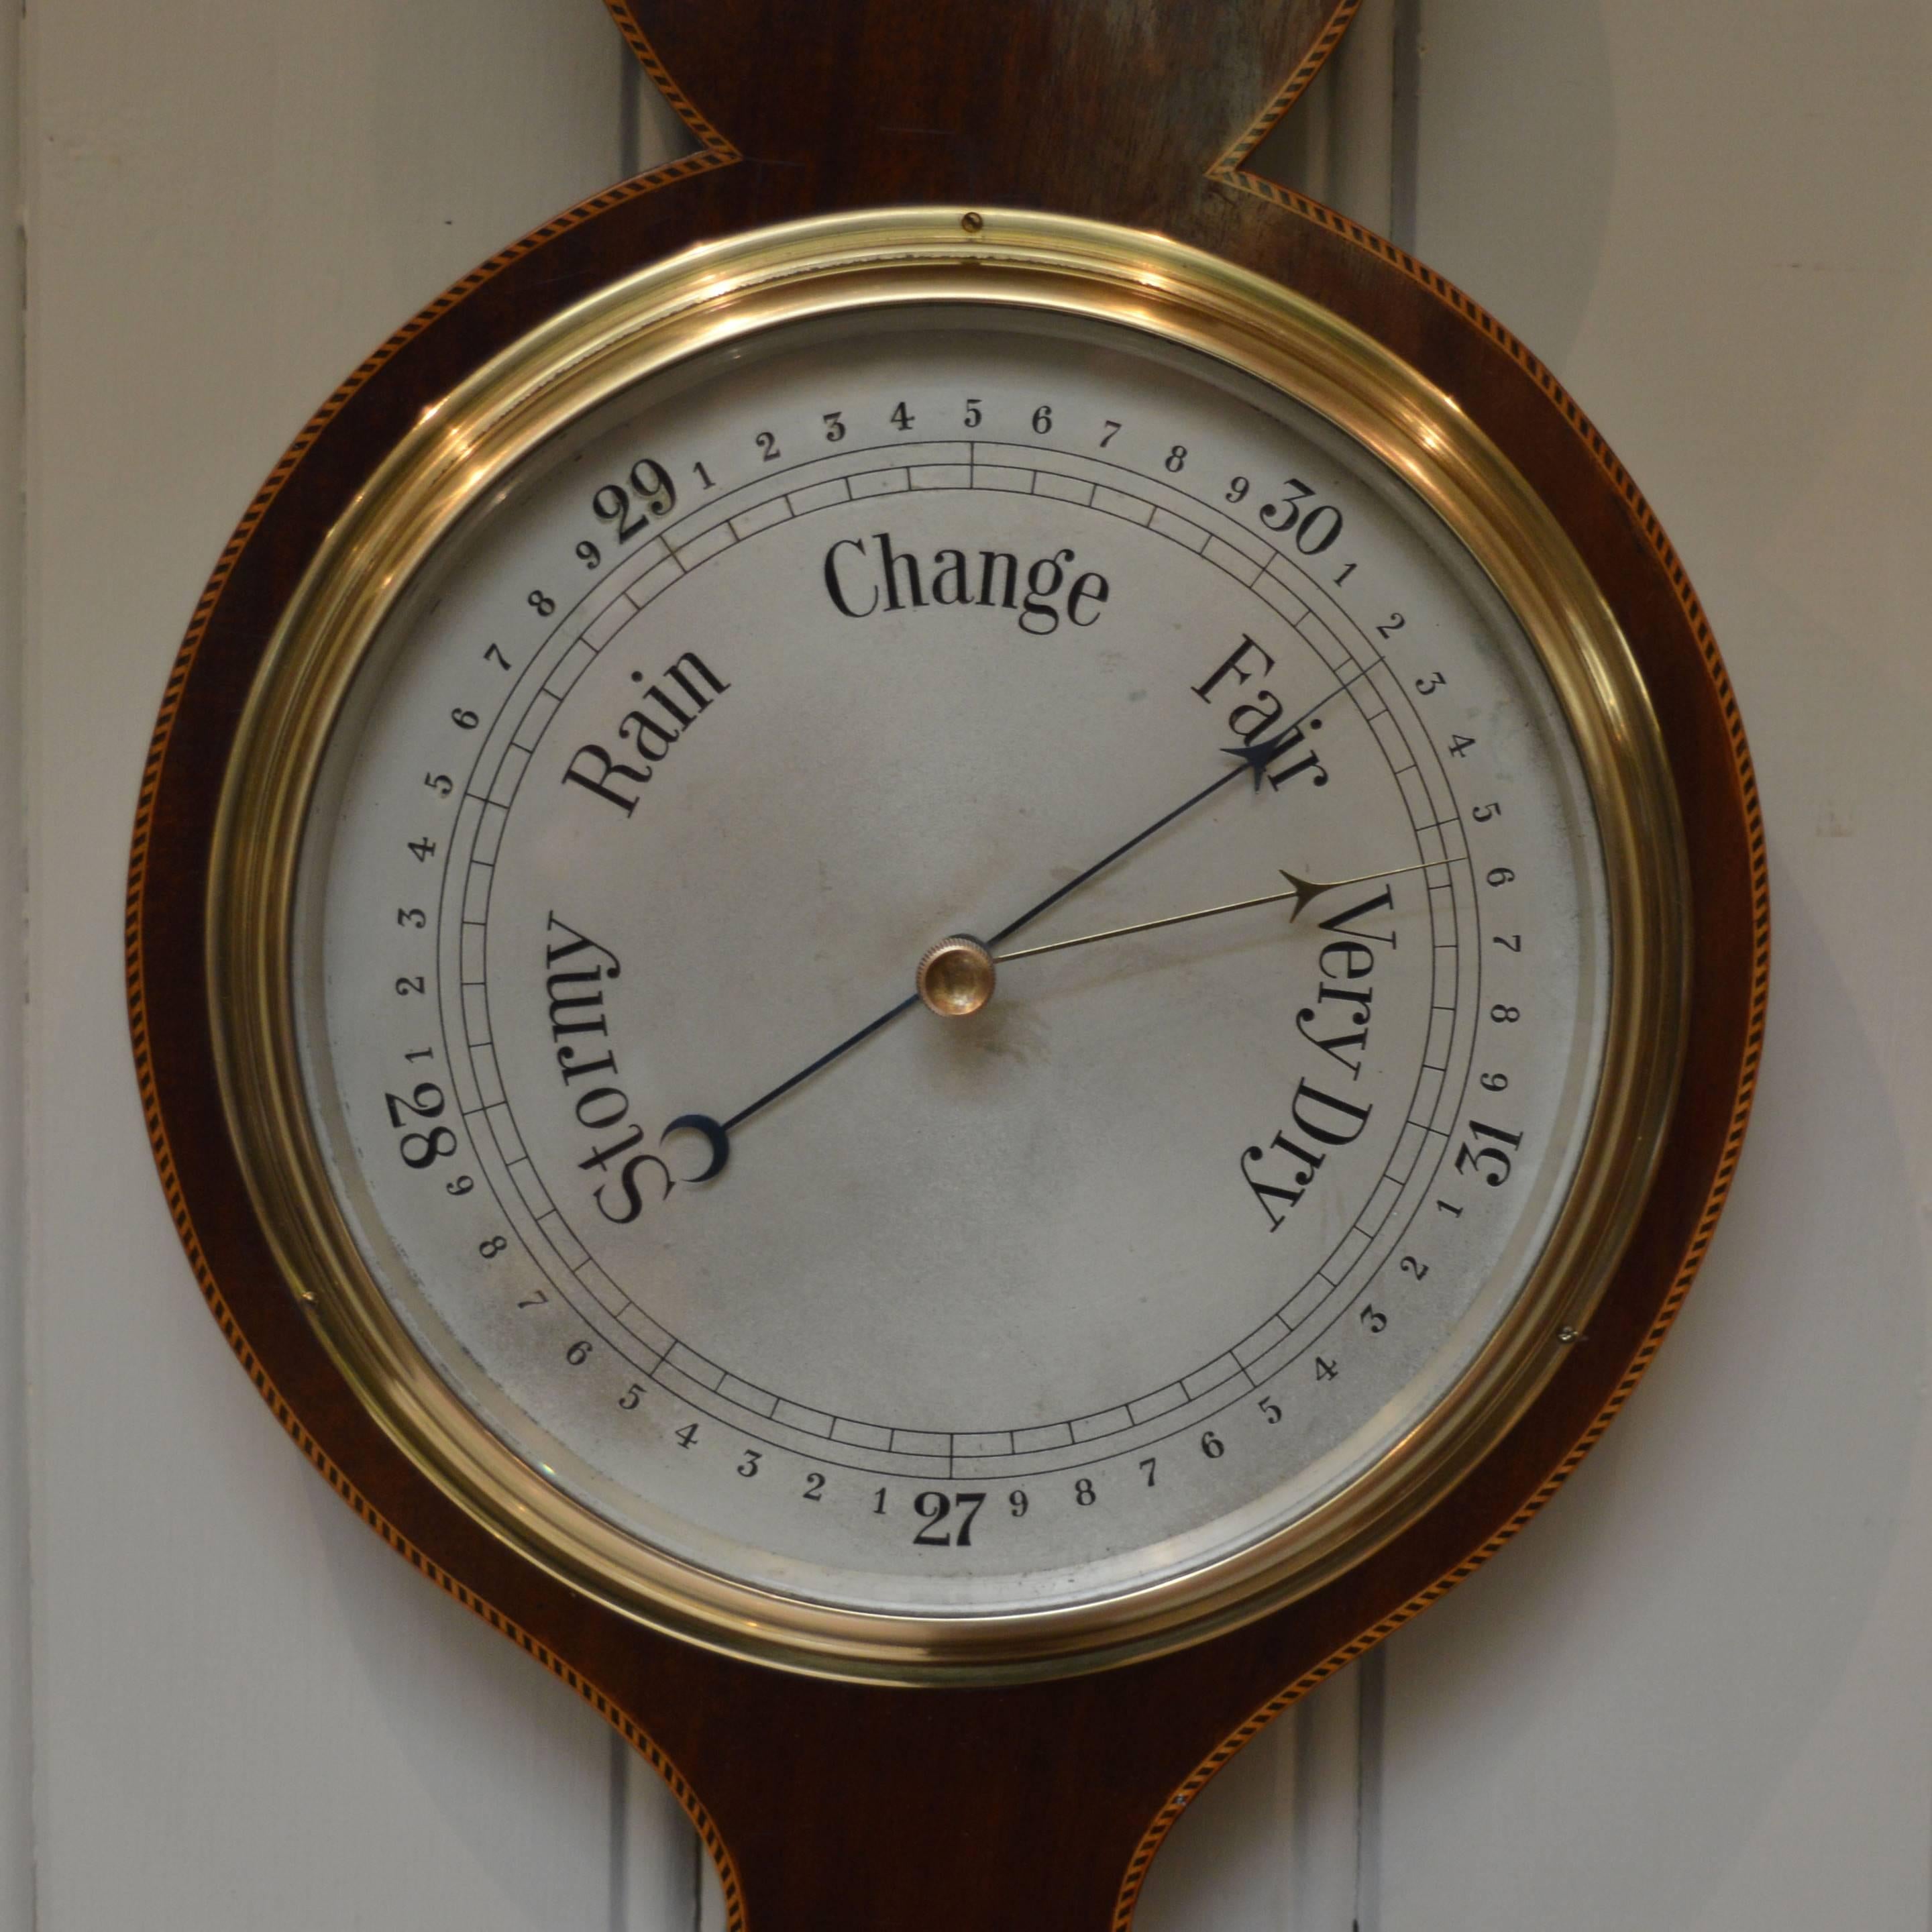 A solid mahogany banjo barometer, having a case with a break arch pediment with a brass finial and inlaid with boxwood inlays. It has an aneroid movement , with an alcohol thermometer. This barometer does not contain mercury so it can easily be